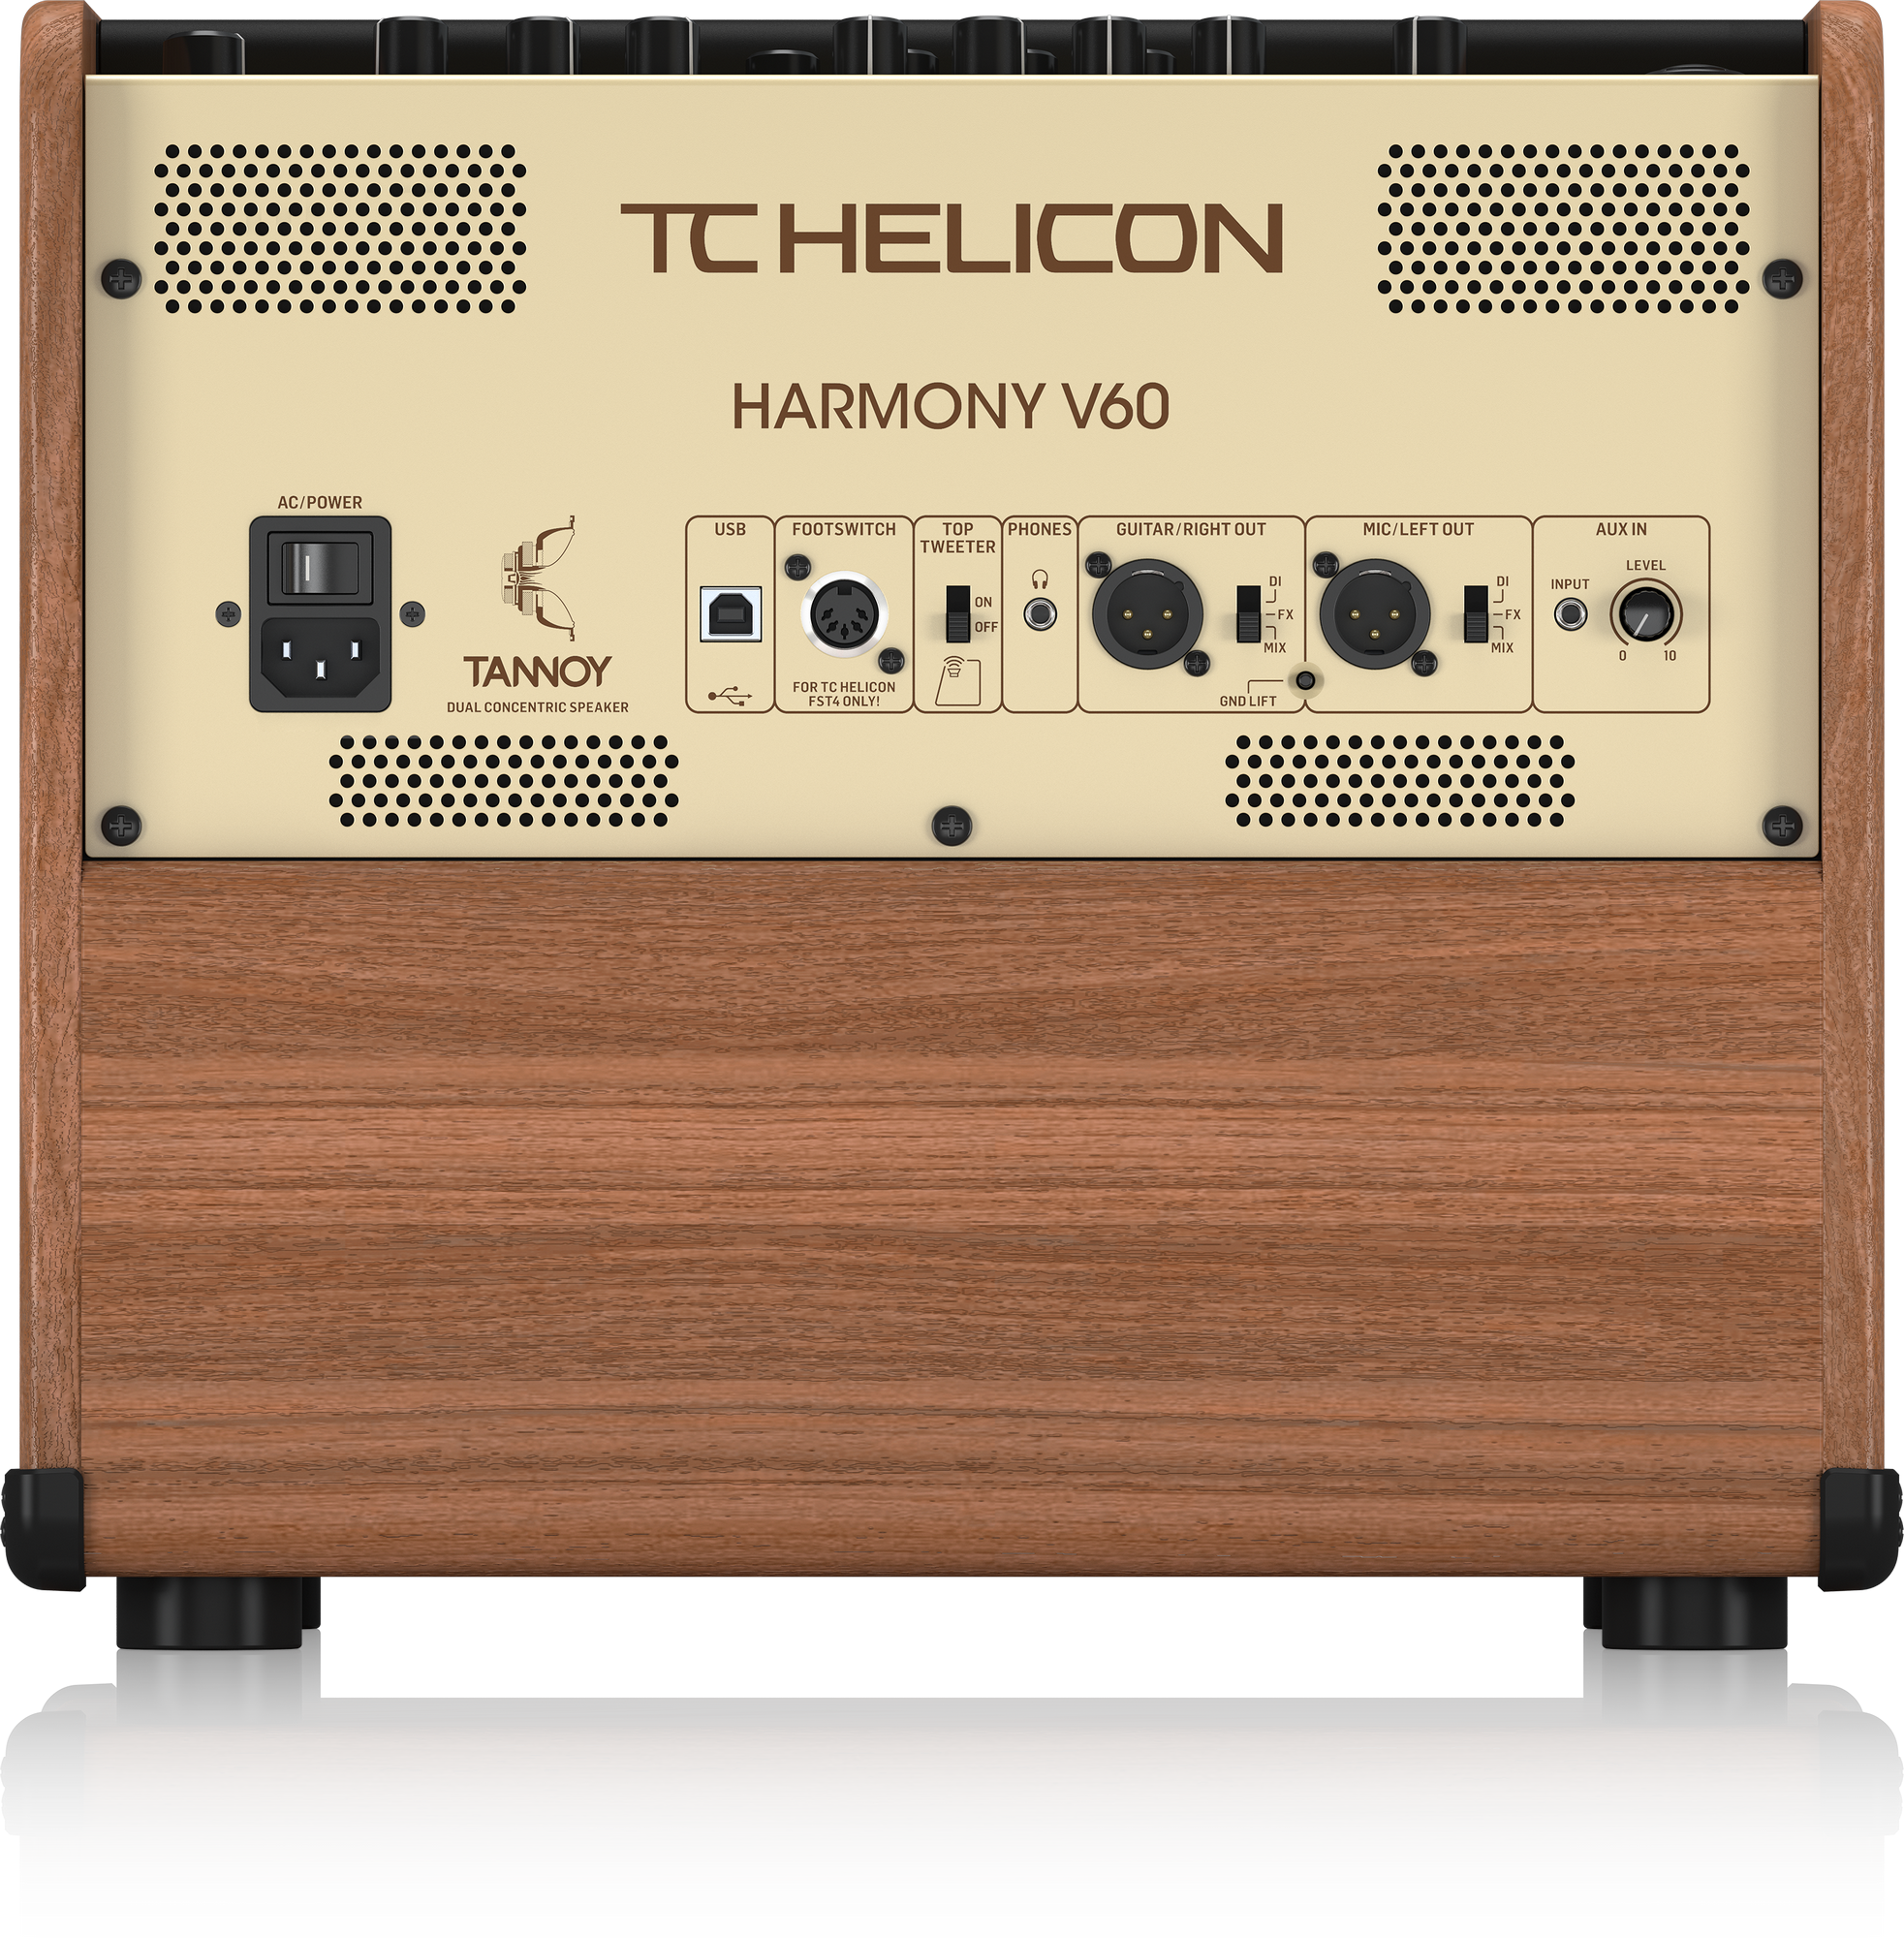 TC HELICON HARMONY V60 60 WATT 2 CHANNEL ACOUSTIC AMPLIFIER WITH VOCAL PROCESSING, LOOPER, TANNOY DUAL CONCENTRIC SPEAKER AND 4-BUTTON FOOTSWITCH, TC HELICON, ACOUSTIC AMPLIFIER, tc-helicon-acoustic-amp-harmony-v60, ZOSO MUSIC SDN BHD